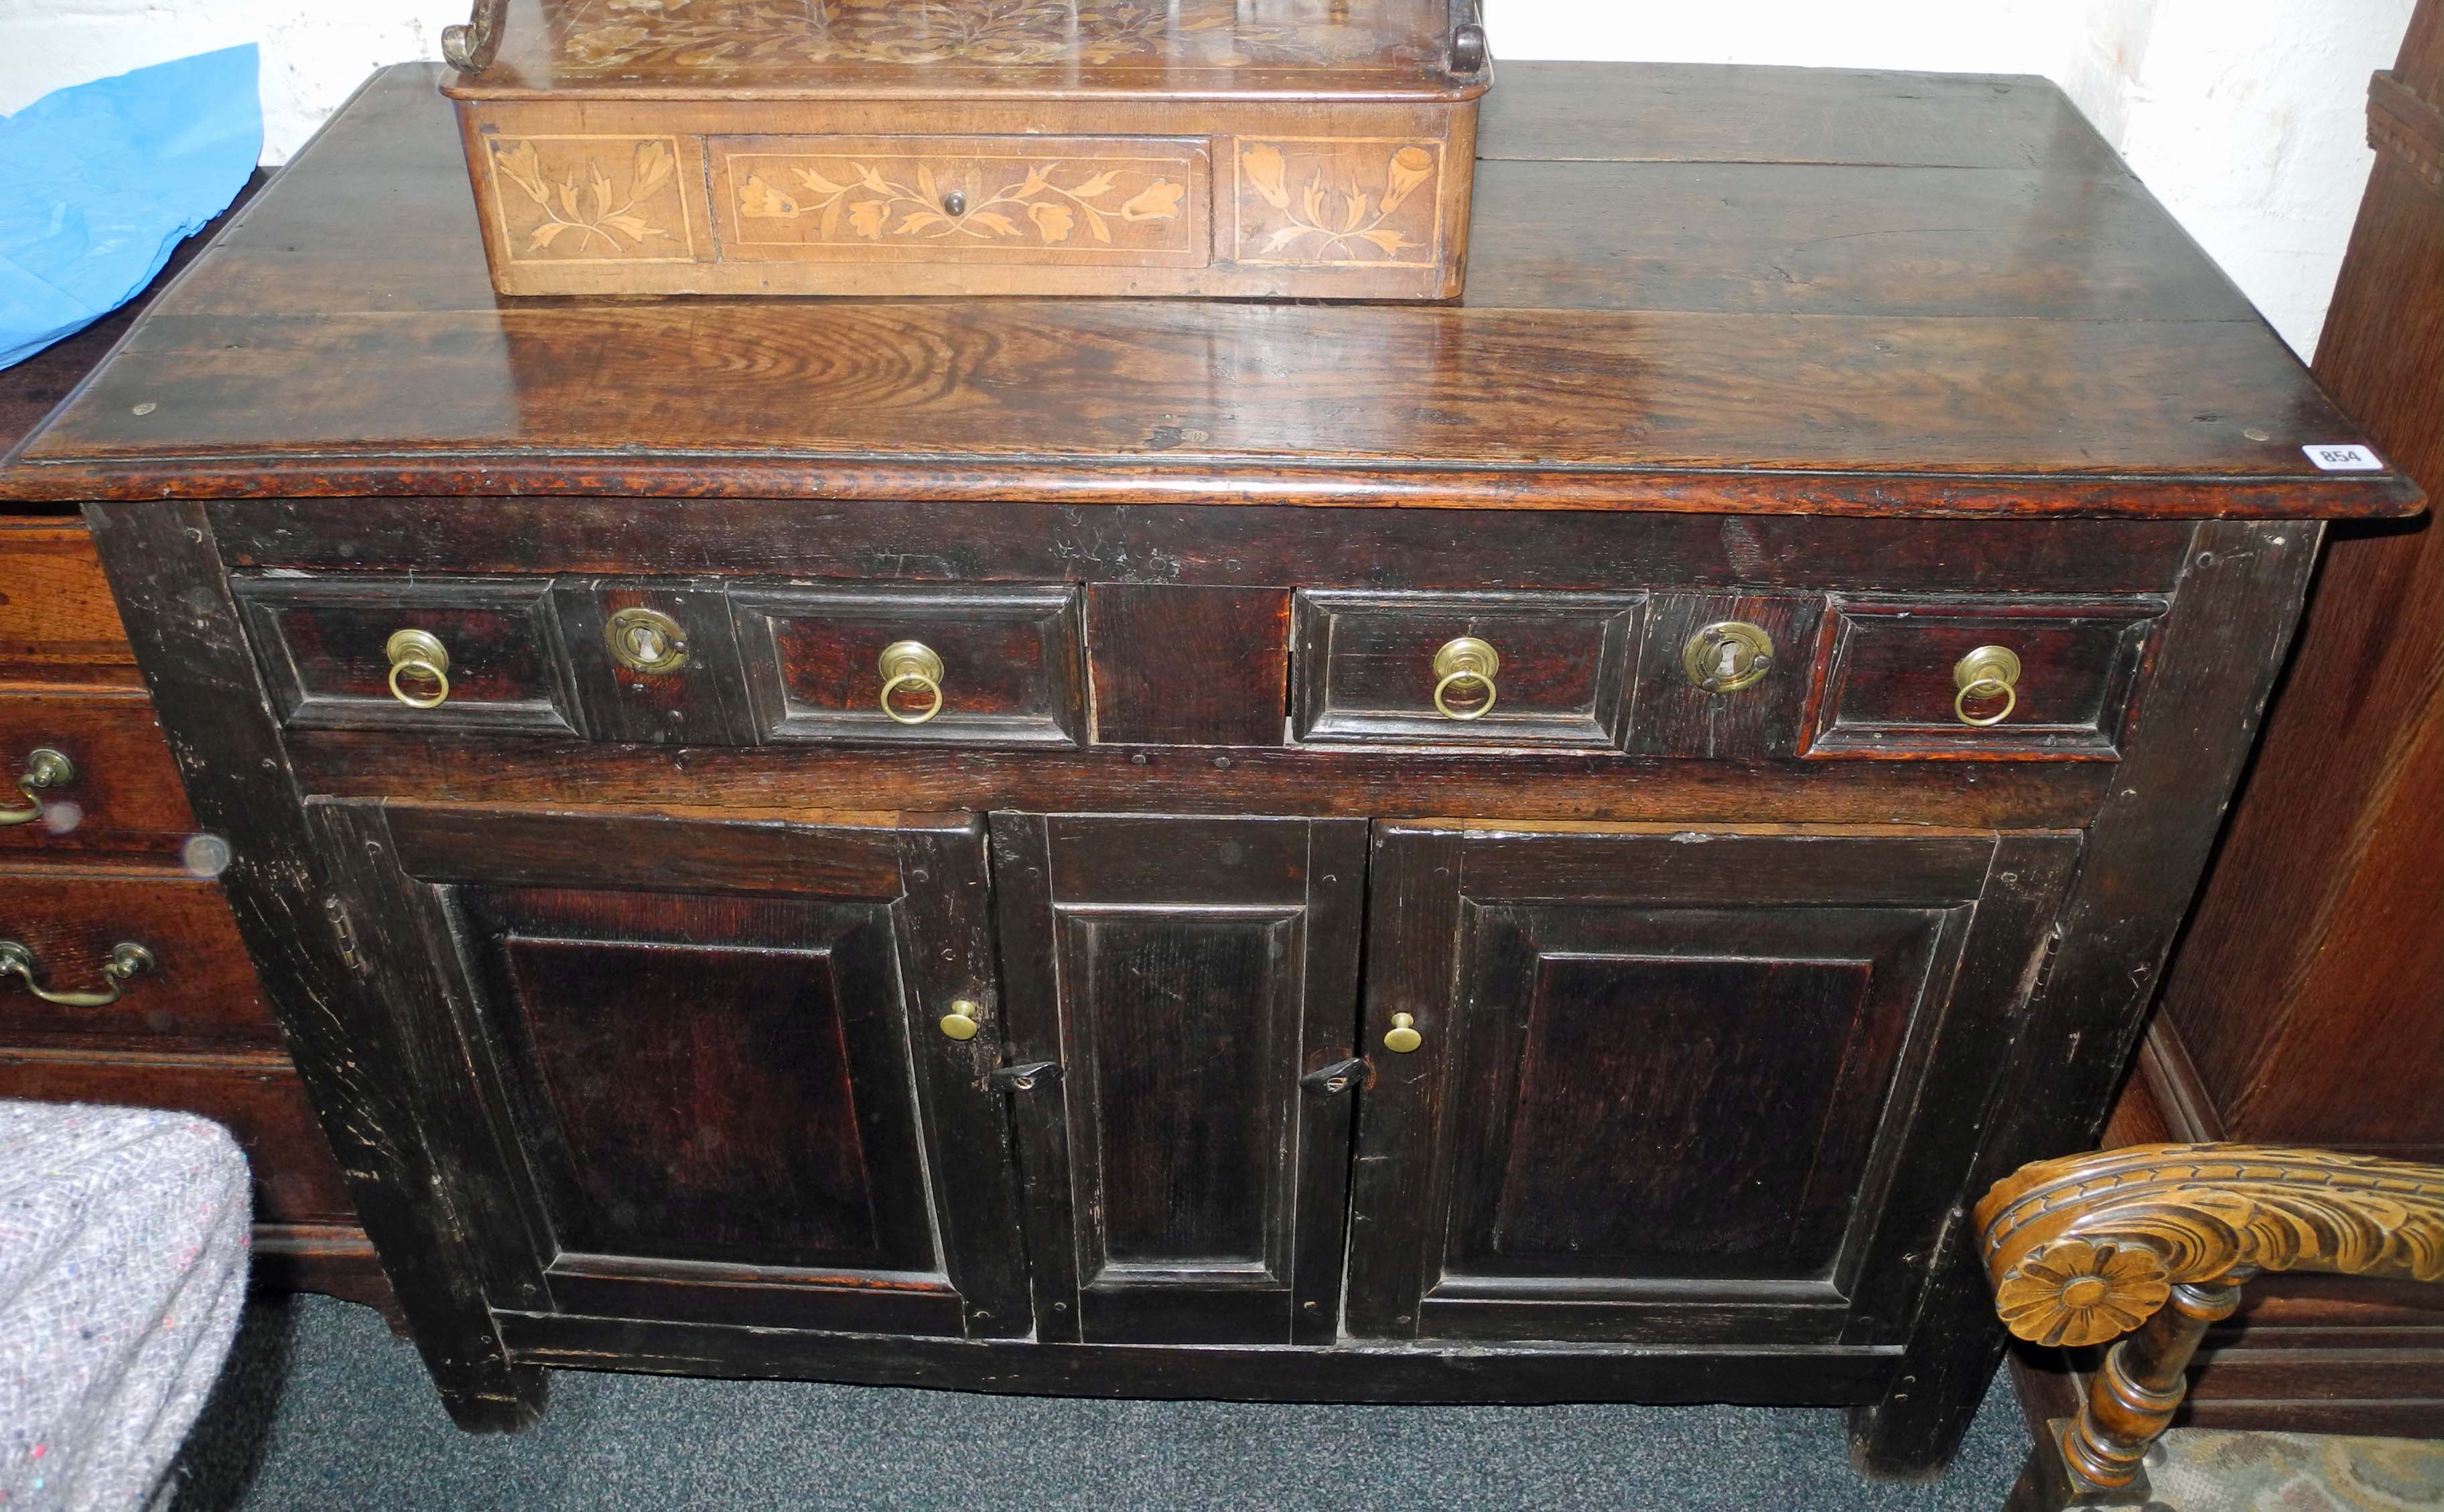 An antique provincial oak and chestnut dresser base in 17th century style, the two short drawers